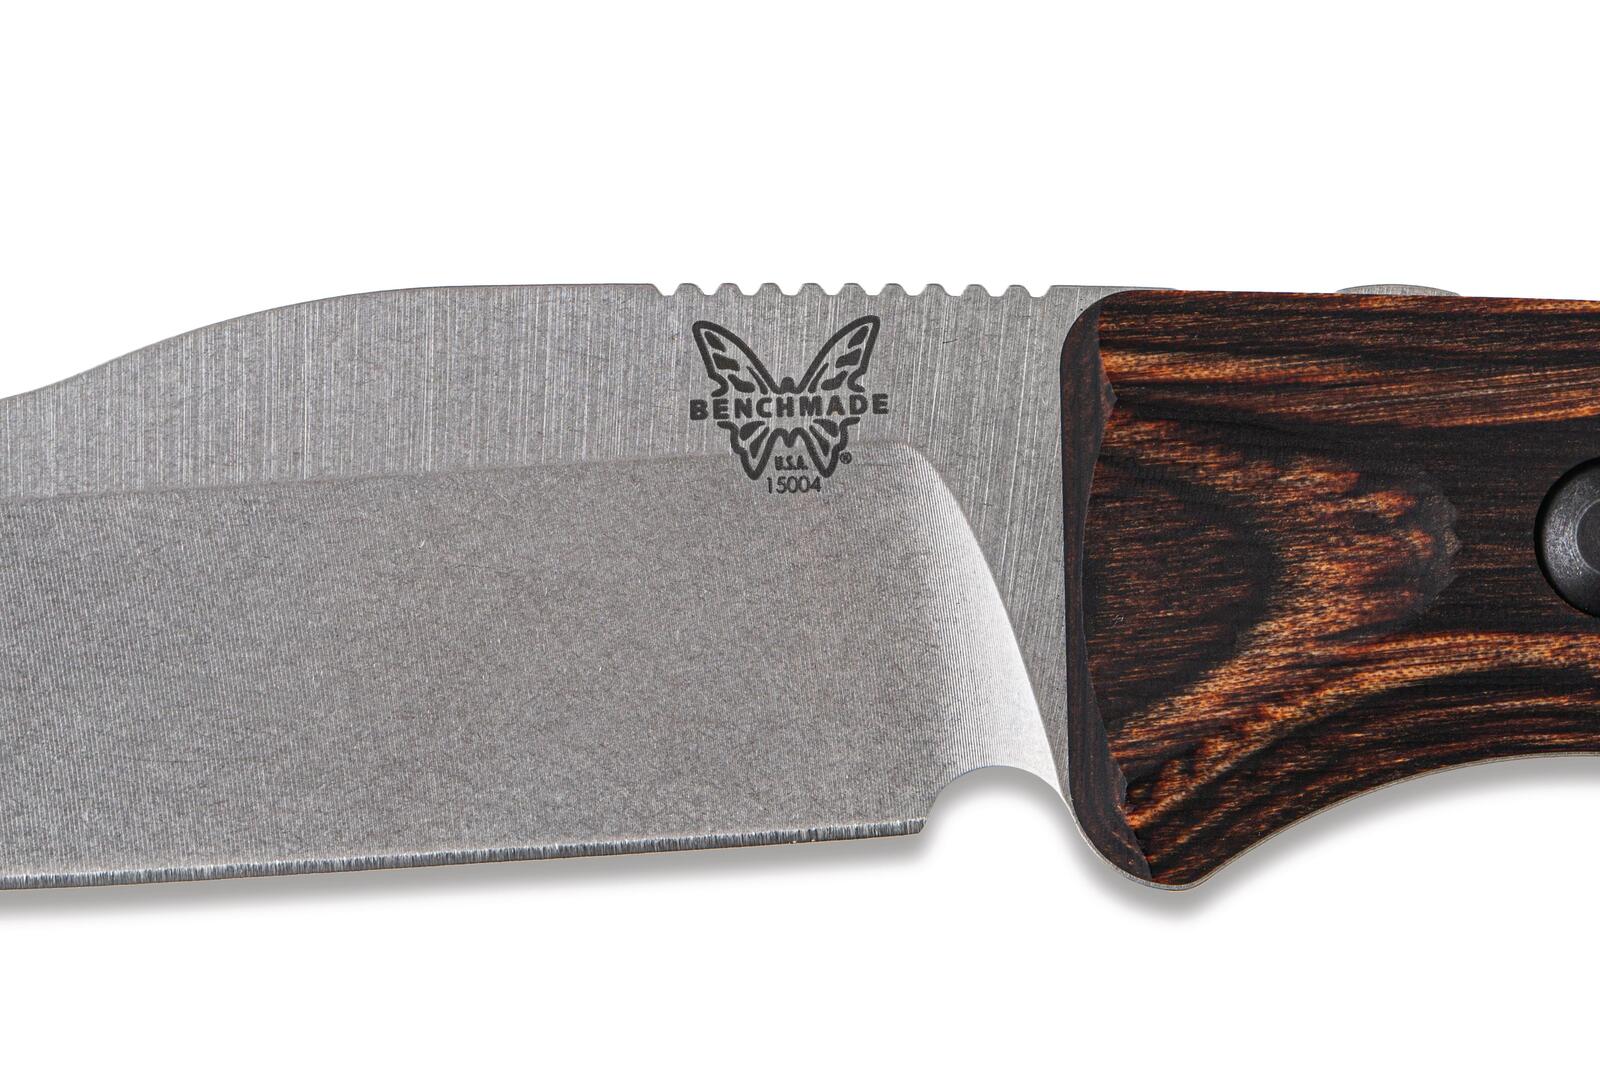 Benchmade 15004 Saddle Mountain Skinner Knife - Fixed Blade with Gut Hook - Wood Handle - Wander Outdoors